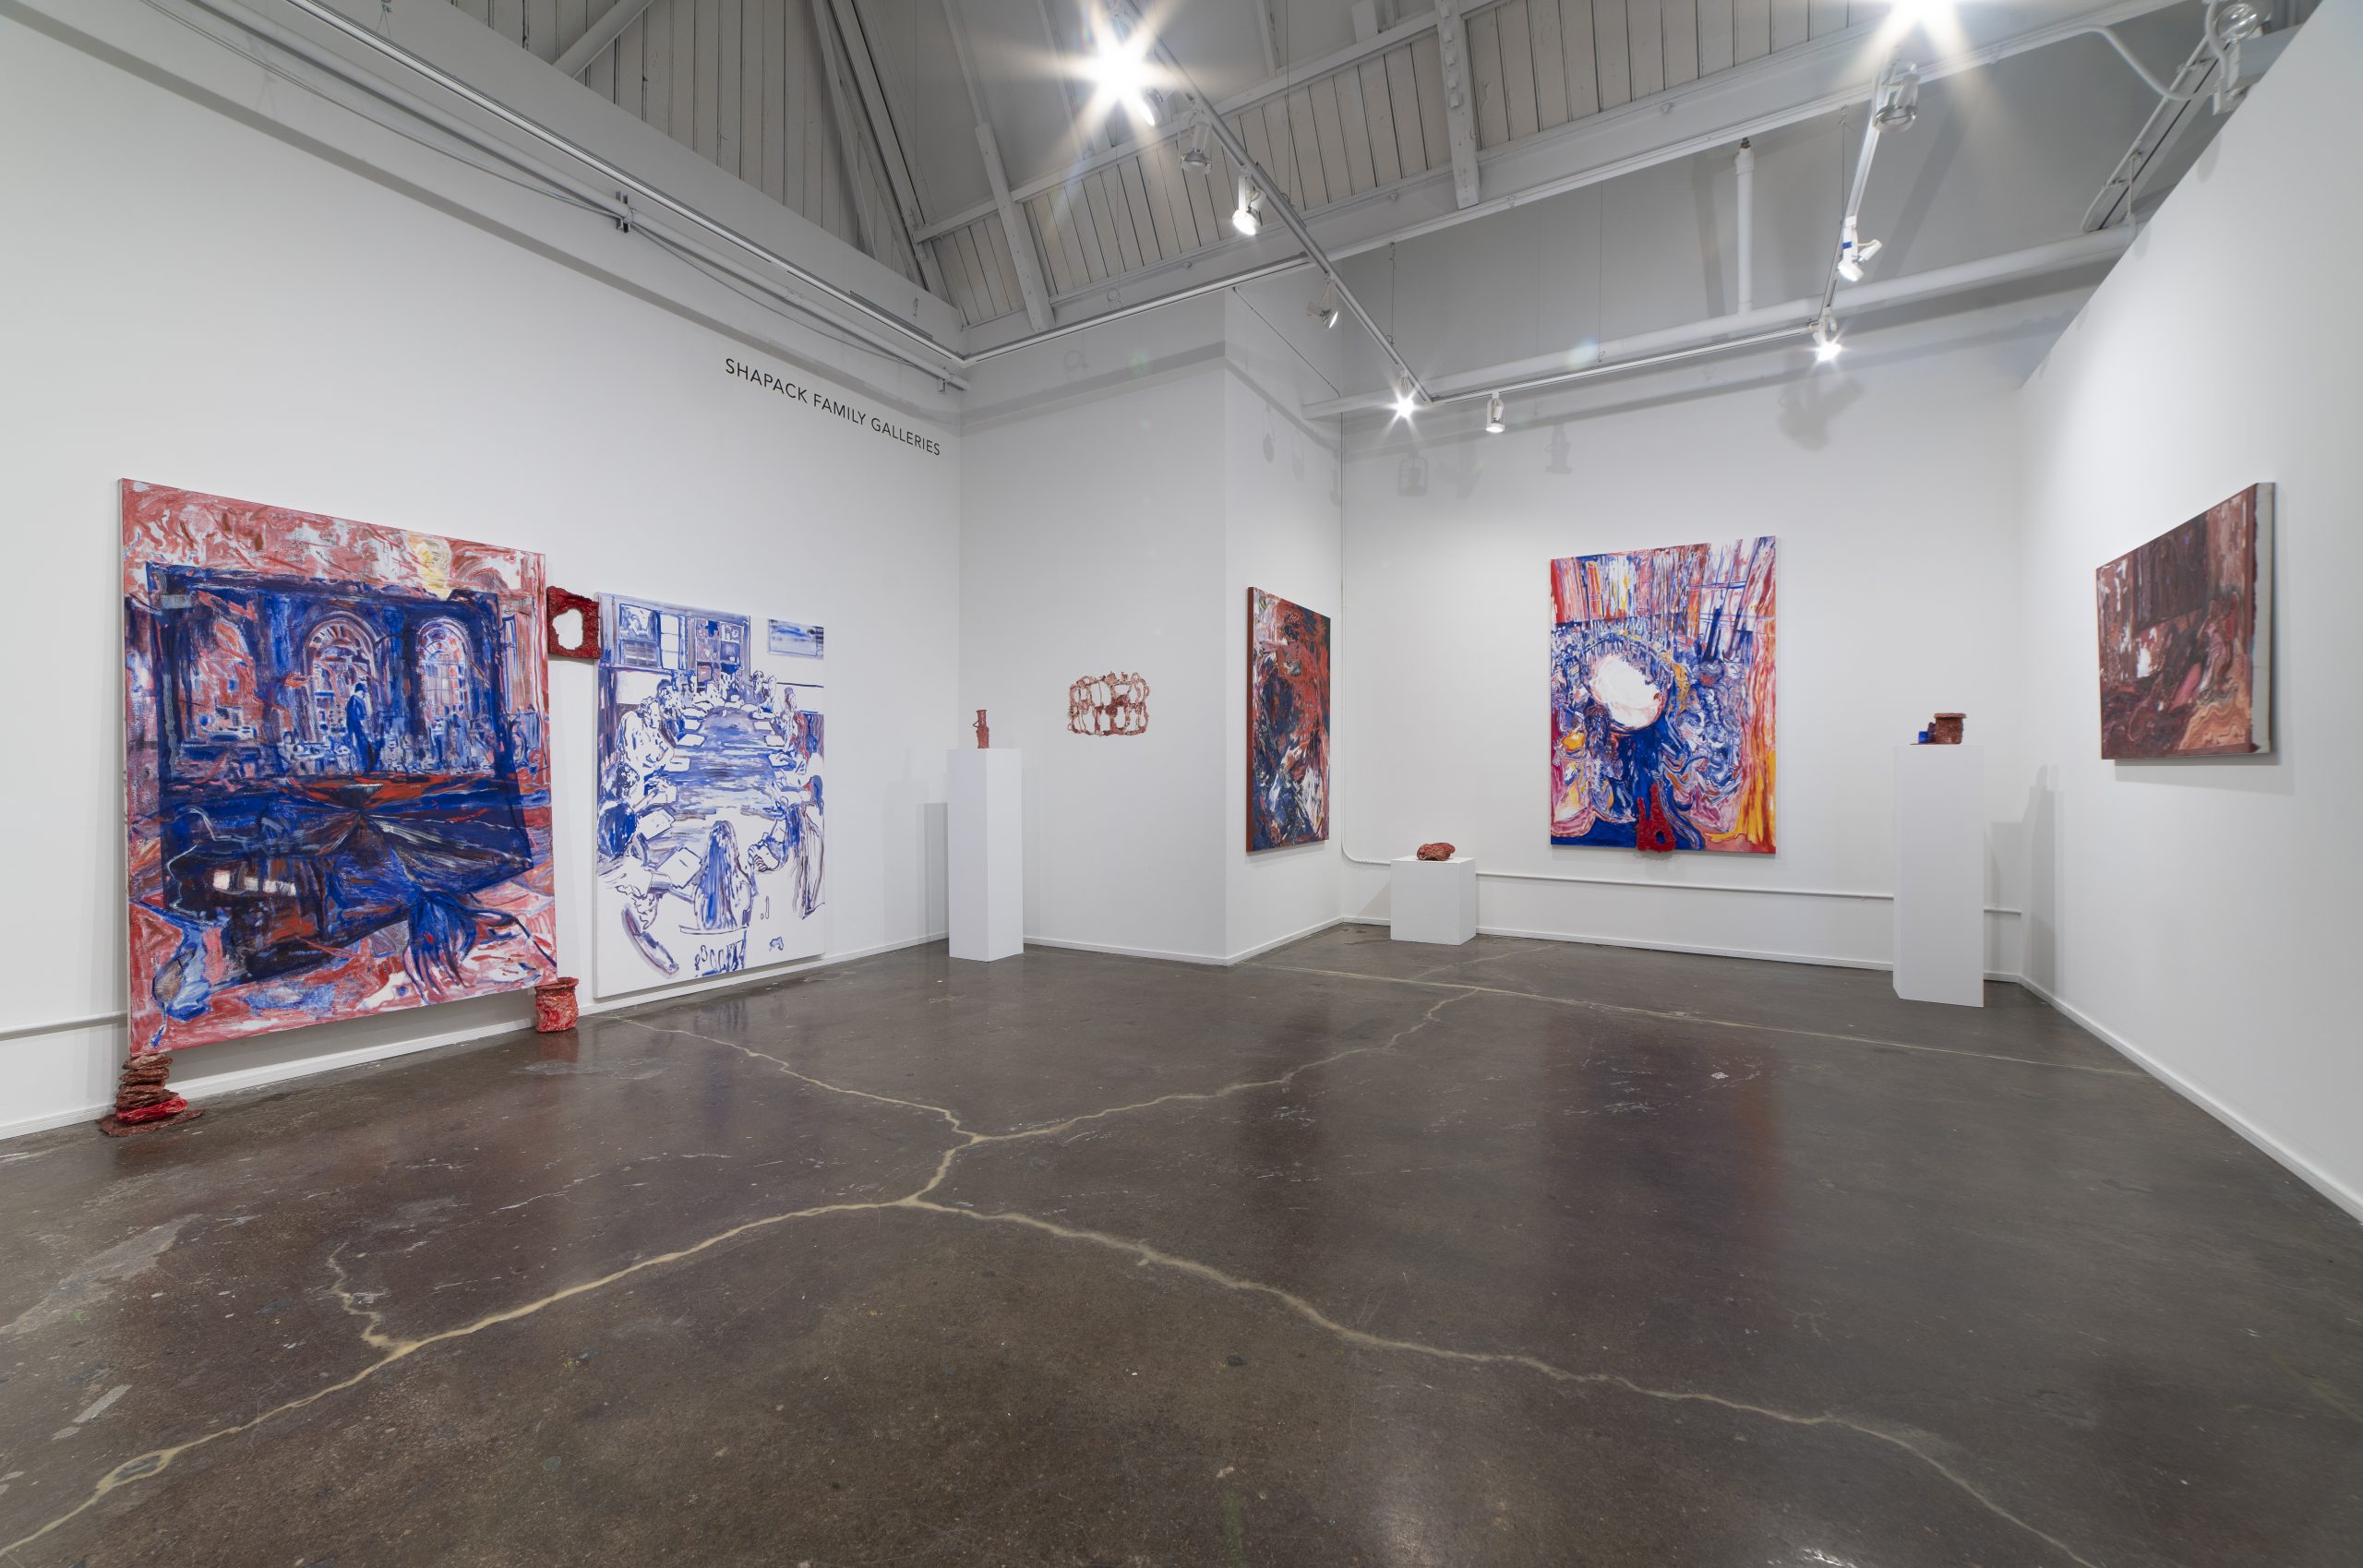 Featured image: An installation view of Longing Compass at Chicago Artists Coalition, featuring the work of Karen Dana Cohen. The view of the gallery shows five paintings against white walls and four sculptural pieces with various additional three-dimensional pieces accompanying some of the canvases. The paintings all portray groups of people with large, gestural strokes of blue and red paint. Image courtesy of the artist.